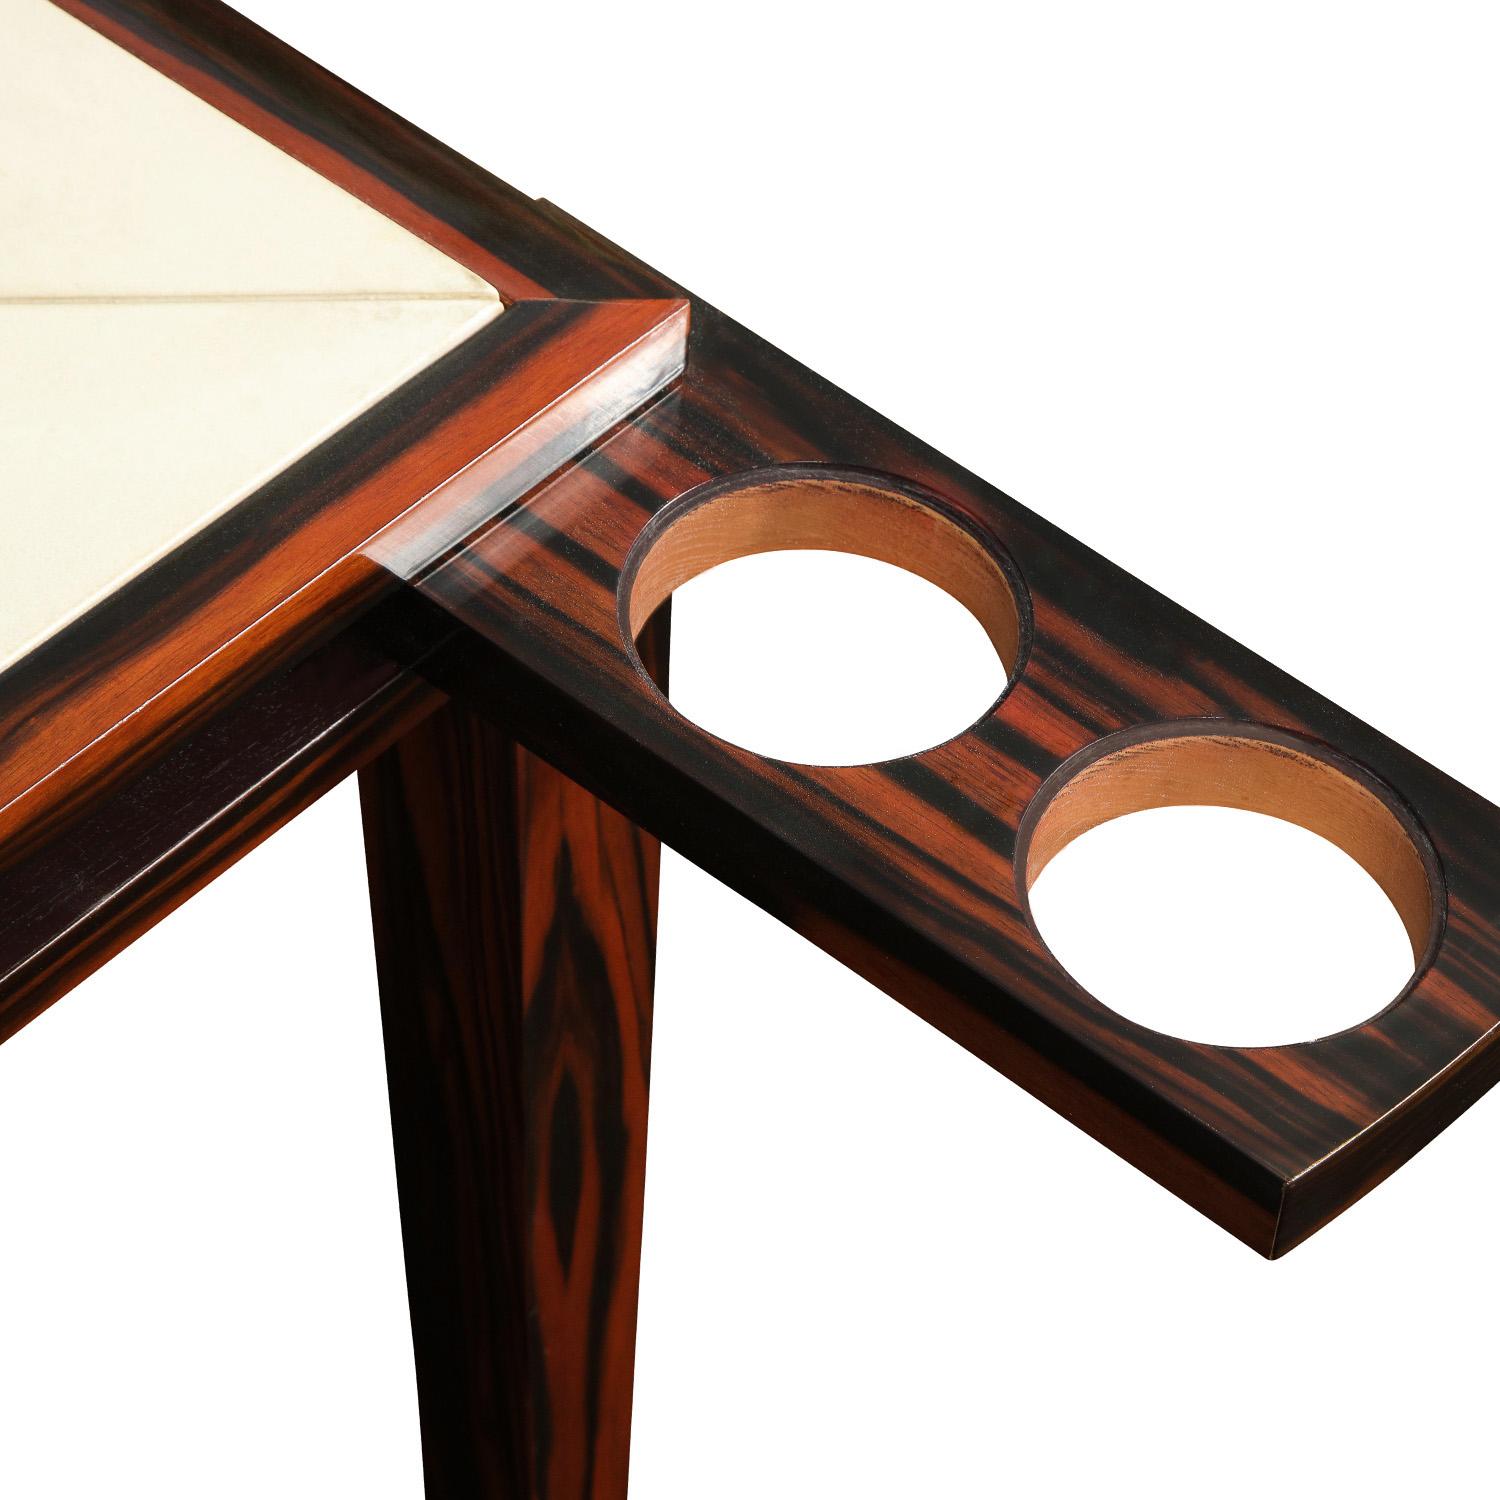 Hand-Crafted Elegant Game Table in Macassar Ebony with Lacquered Goatskin Top, 1980s